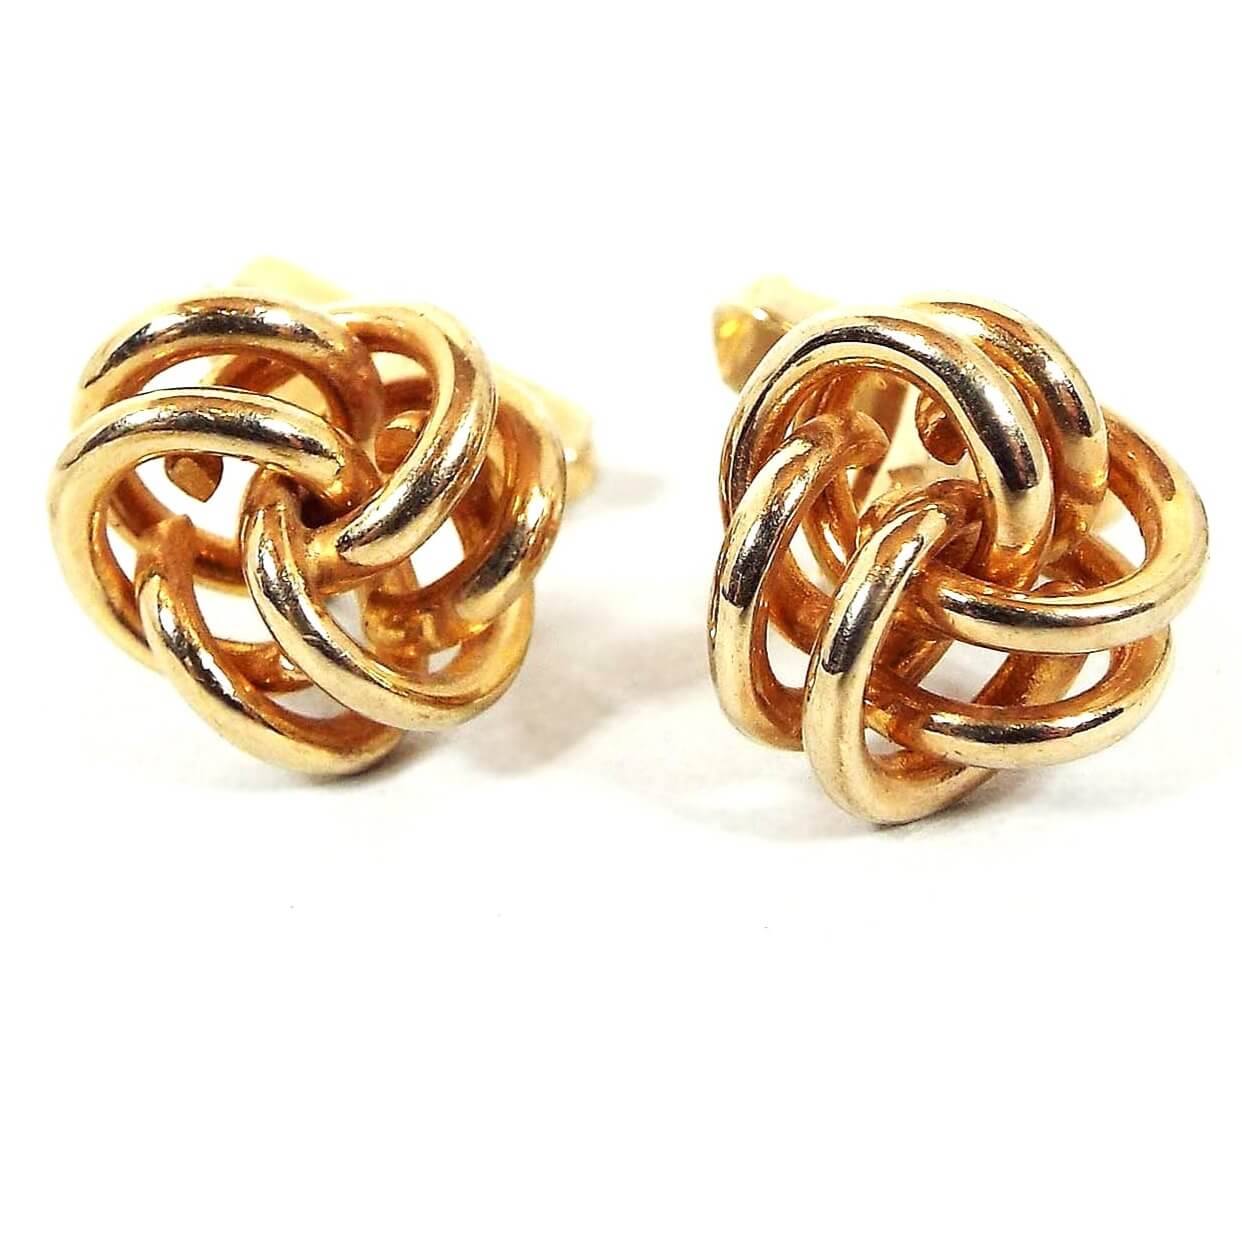 Front view of the retro vintage Swank knot cufflinks. The metal is gold tone in color. They are shaped like open double wires twisted into a knot shape.